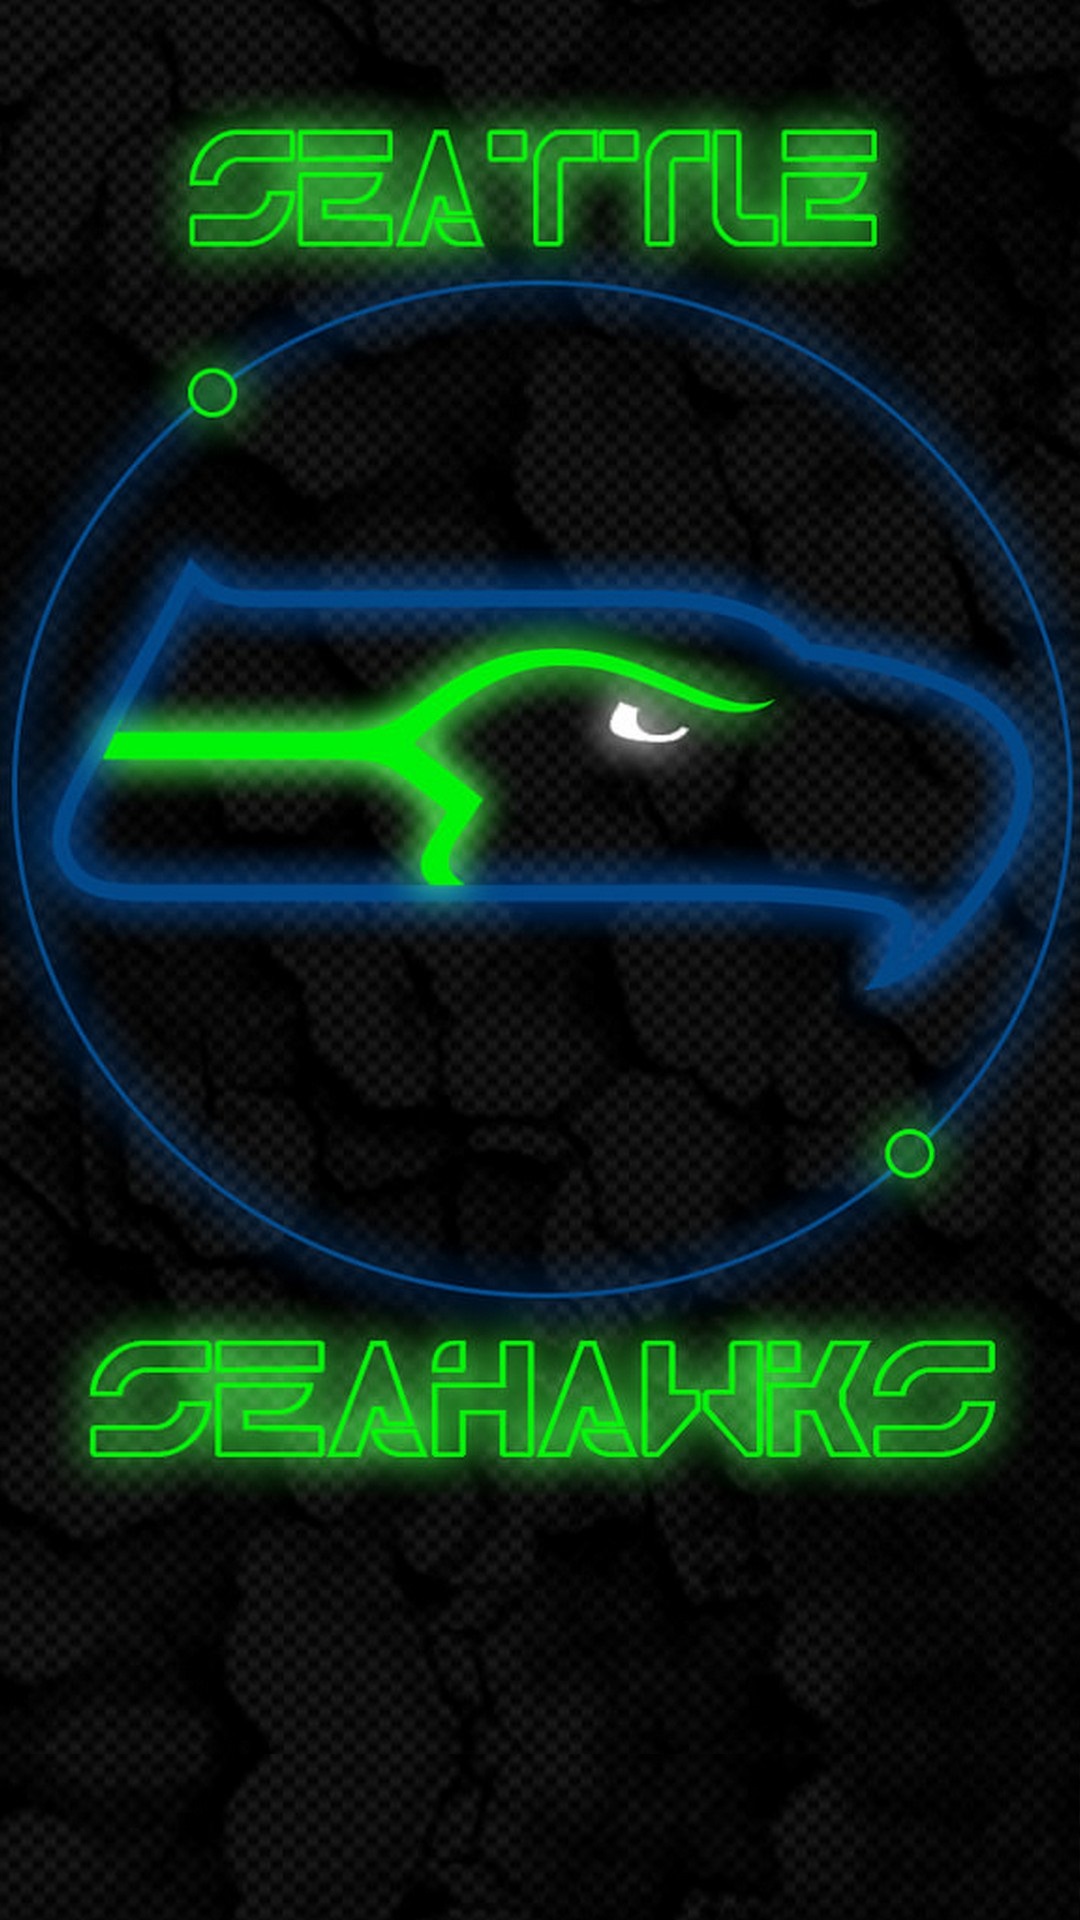 Wallpapers iPhone Seattle Seahawks with high-resolution 1080x1920 pixel. Donwload and set as wallpaper for your iPhone X, iPhone XS home screen backgrounds, XS Max, XR, iPhone8 lock screen wallpaper, iPhone 7, 6, SE and other mobile devices